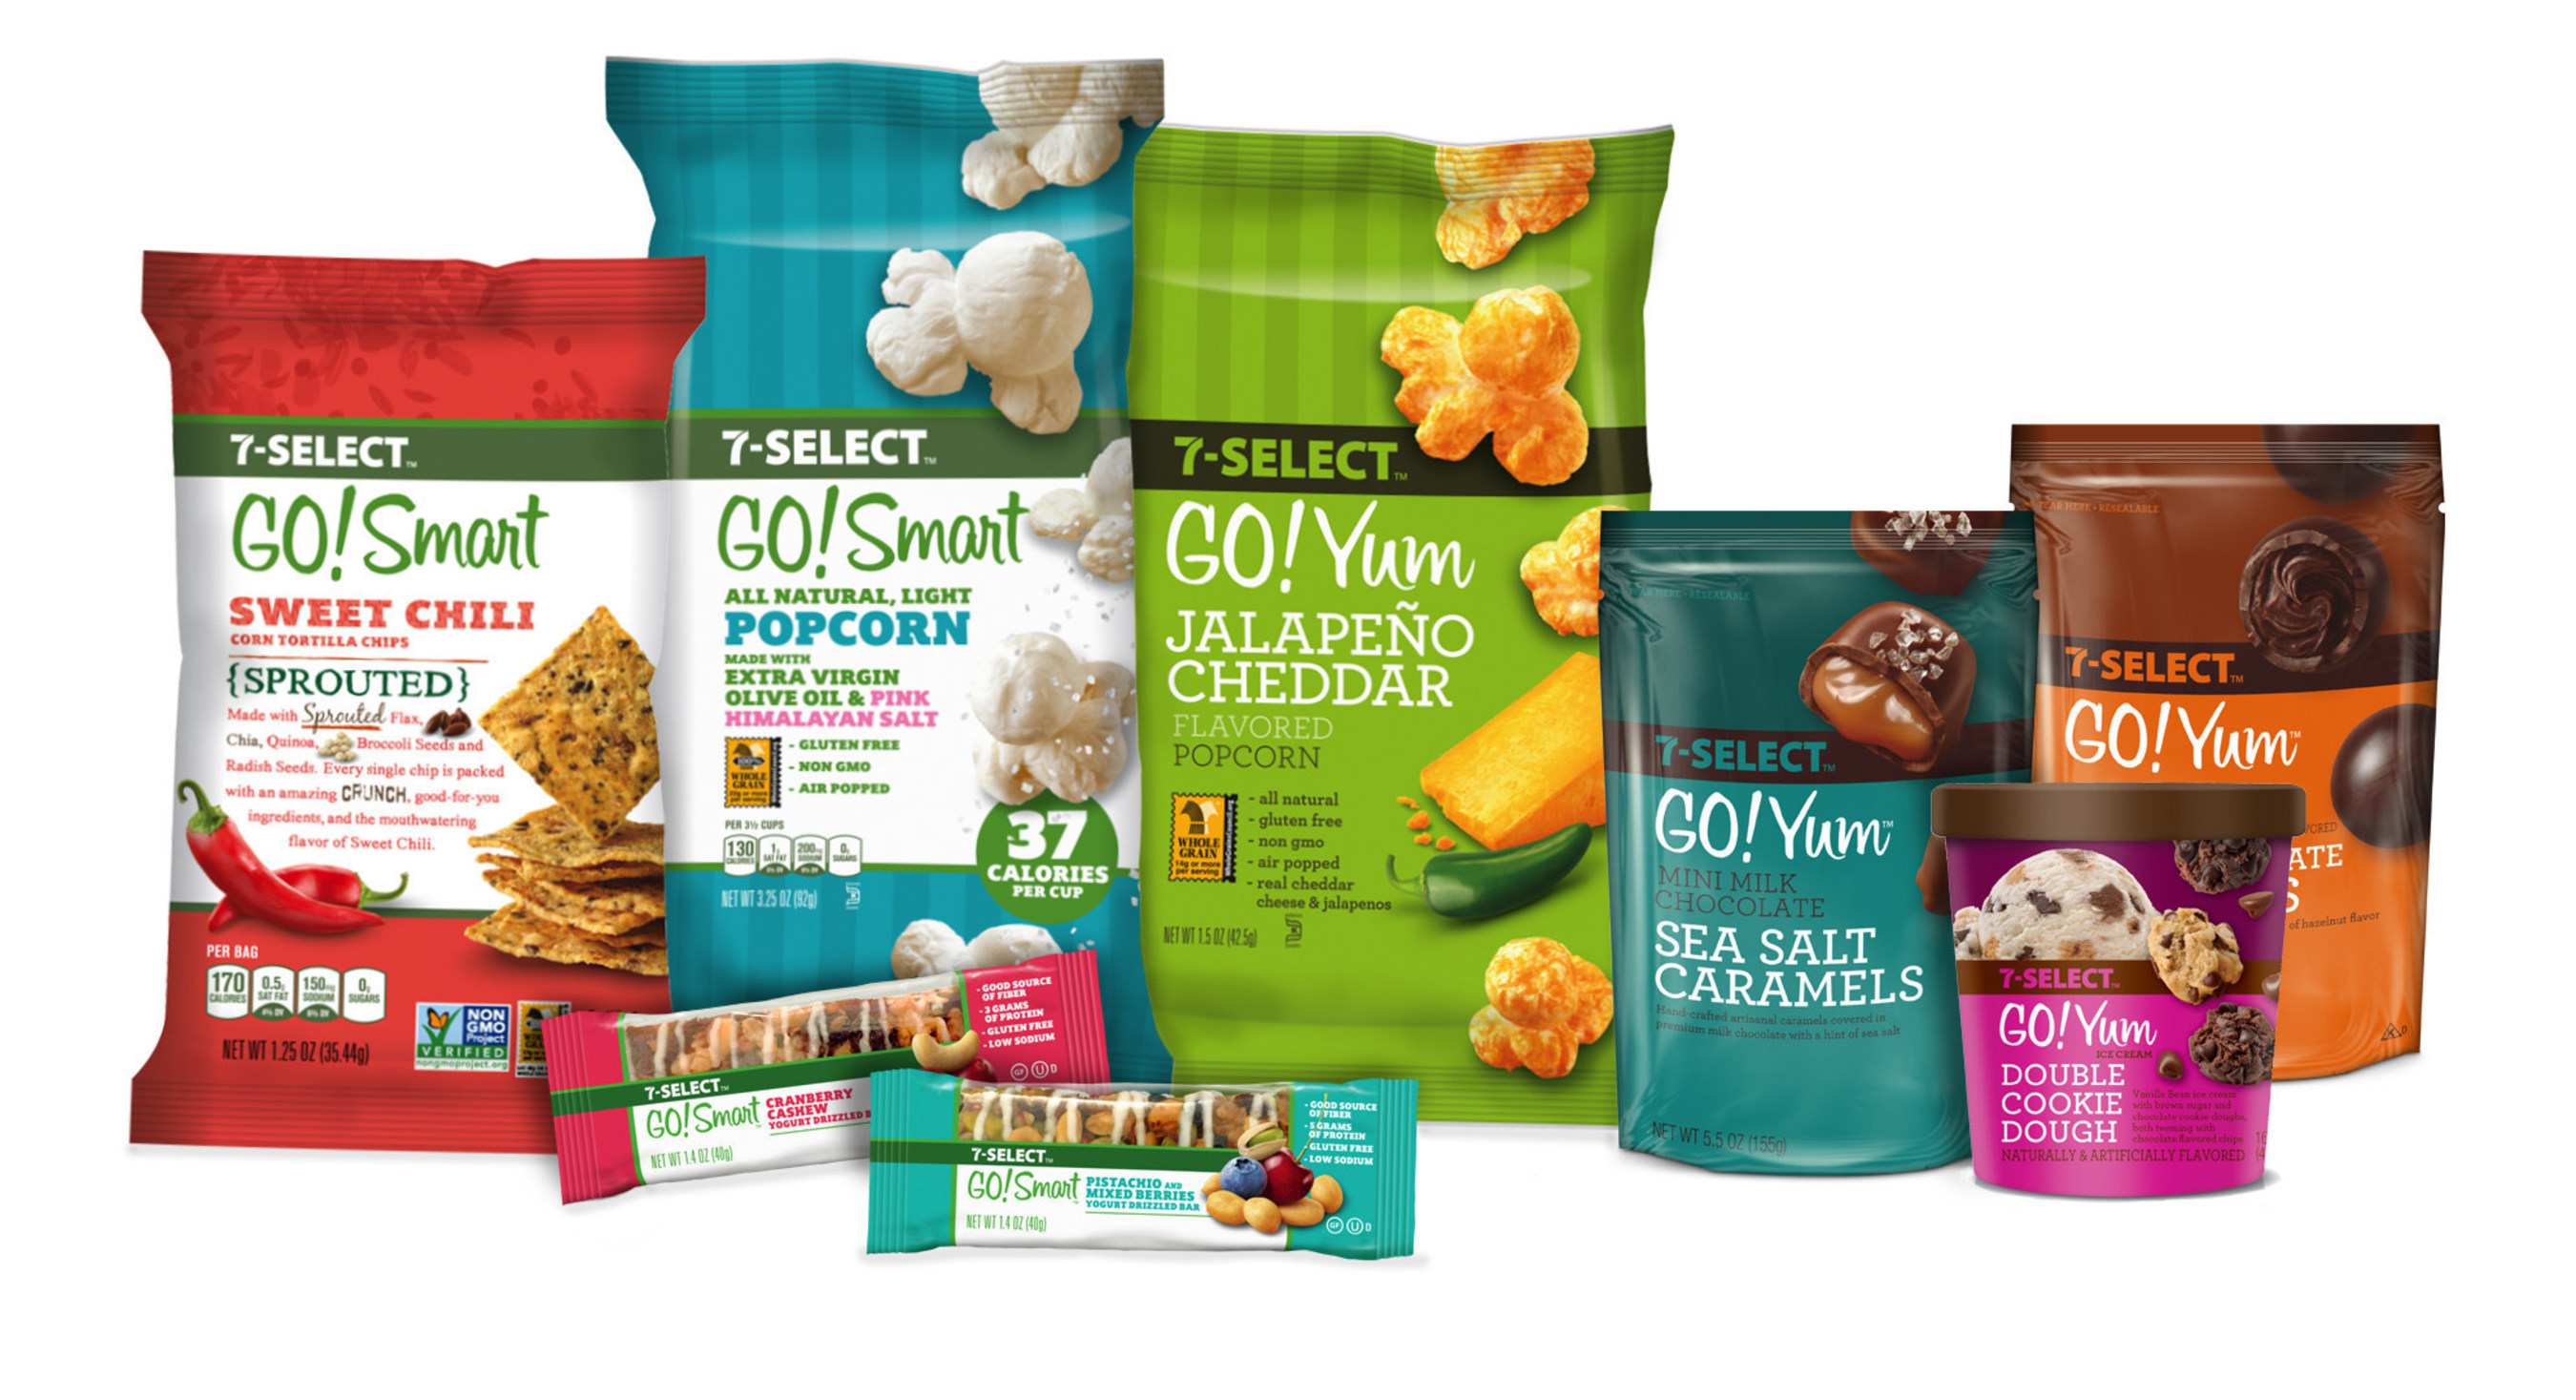 Inspired by customer feedback, 7-Eleven 7-Select GO!Yum(TM) and 7-Select GO!Smart(TM) satisfy consumer requests for variety in both indulgent and better-for-you products.